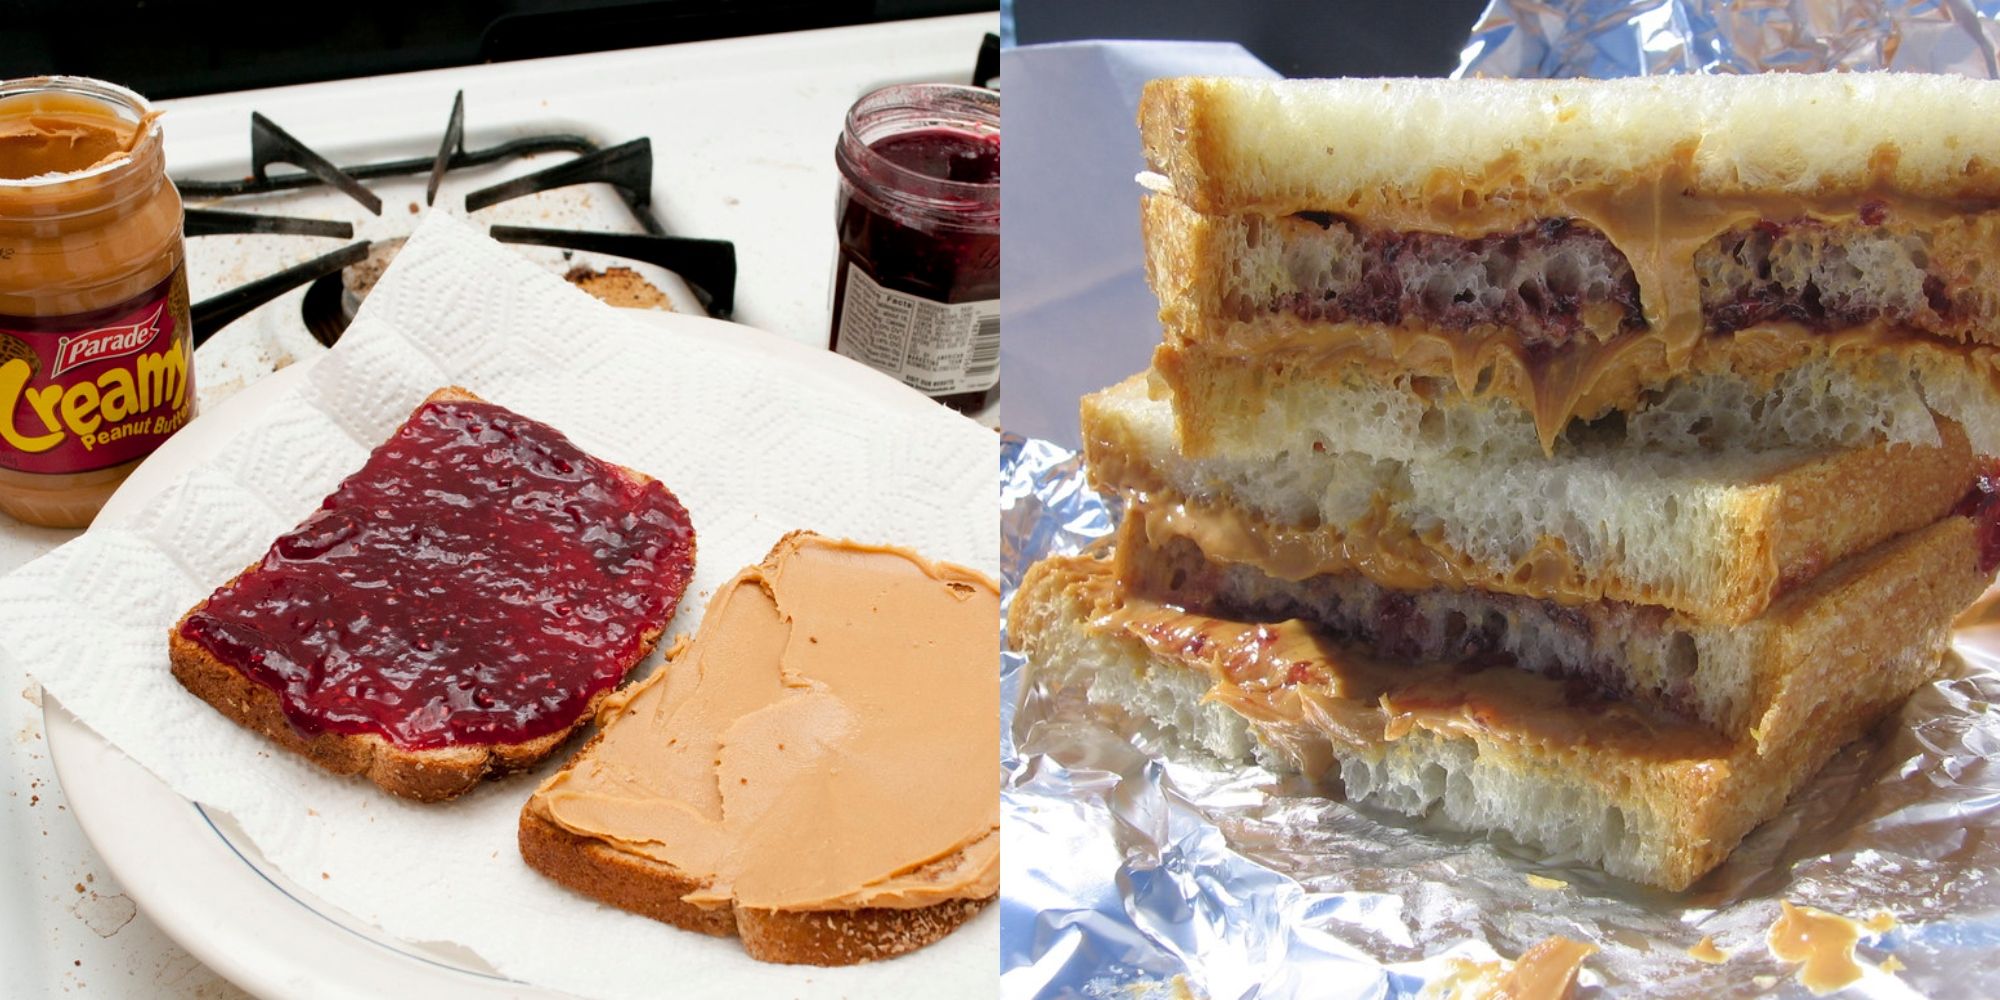 peanut butter and jelly on pieces of bread on plate next to peanut butter jar and peanut butter jelly sandwich on foil